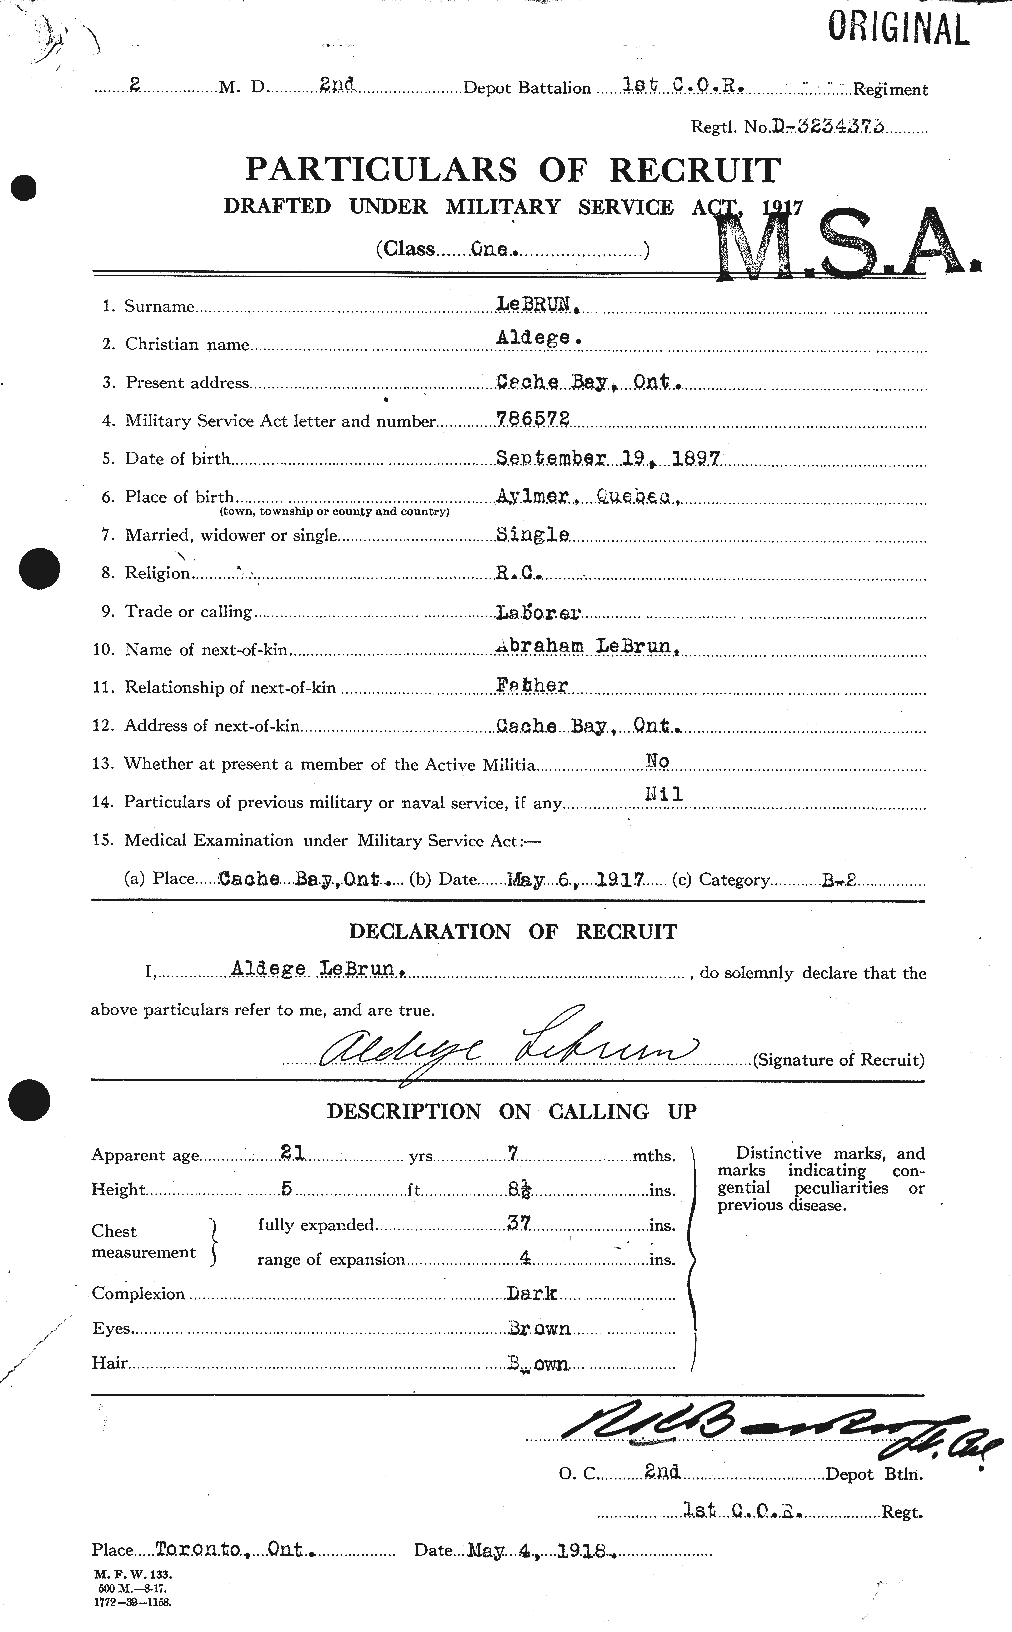 Personnel Records of the First World War - CEF 461544a